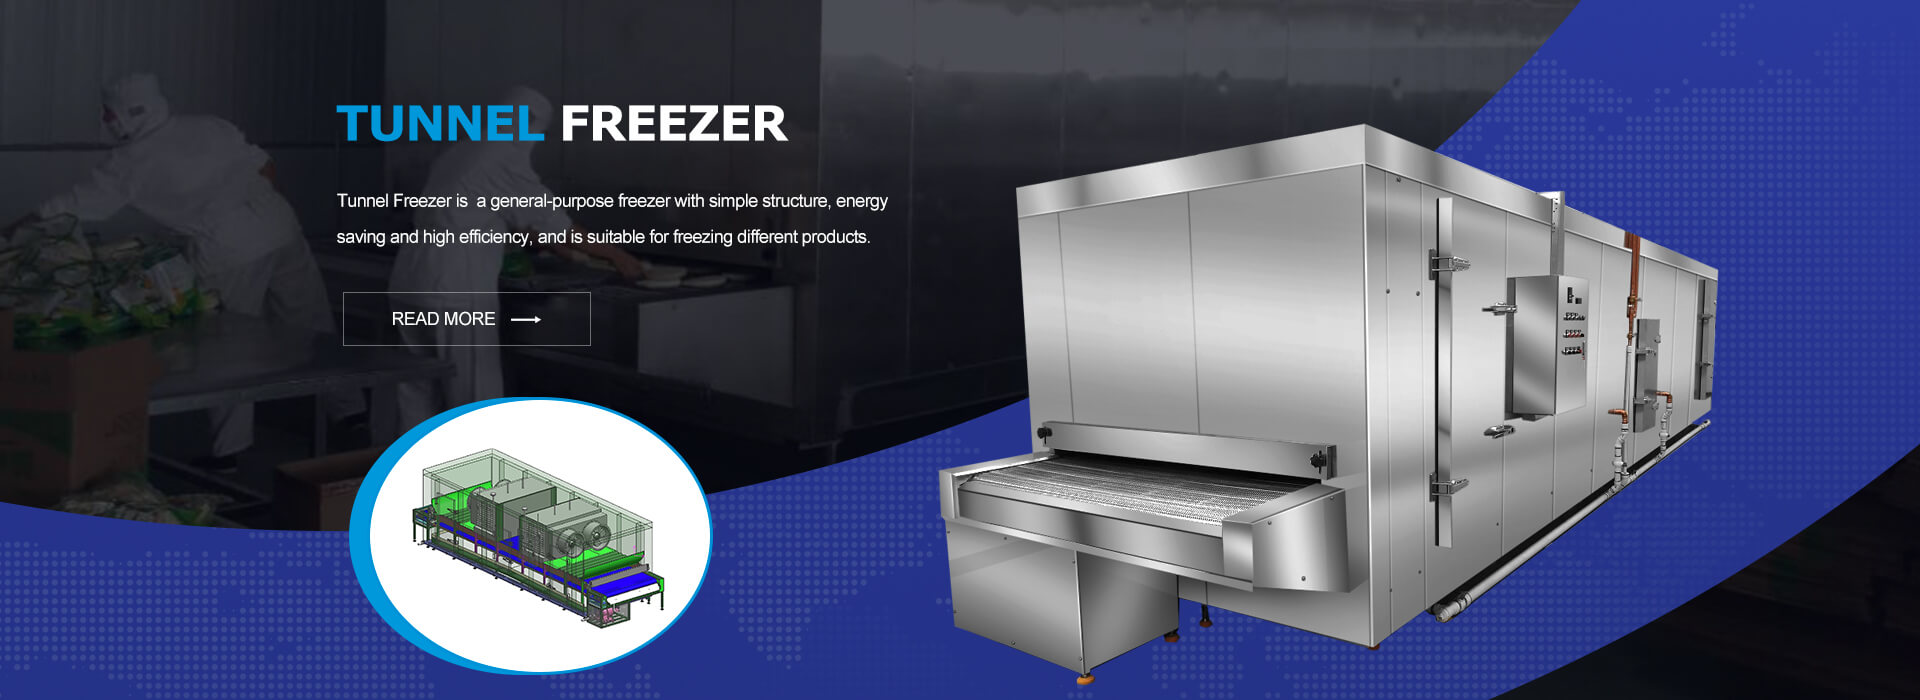 Tunnel Freezer is a general-purpose freezer with simple structure